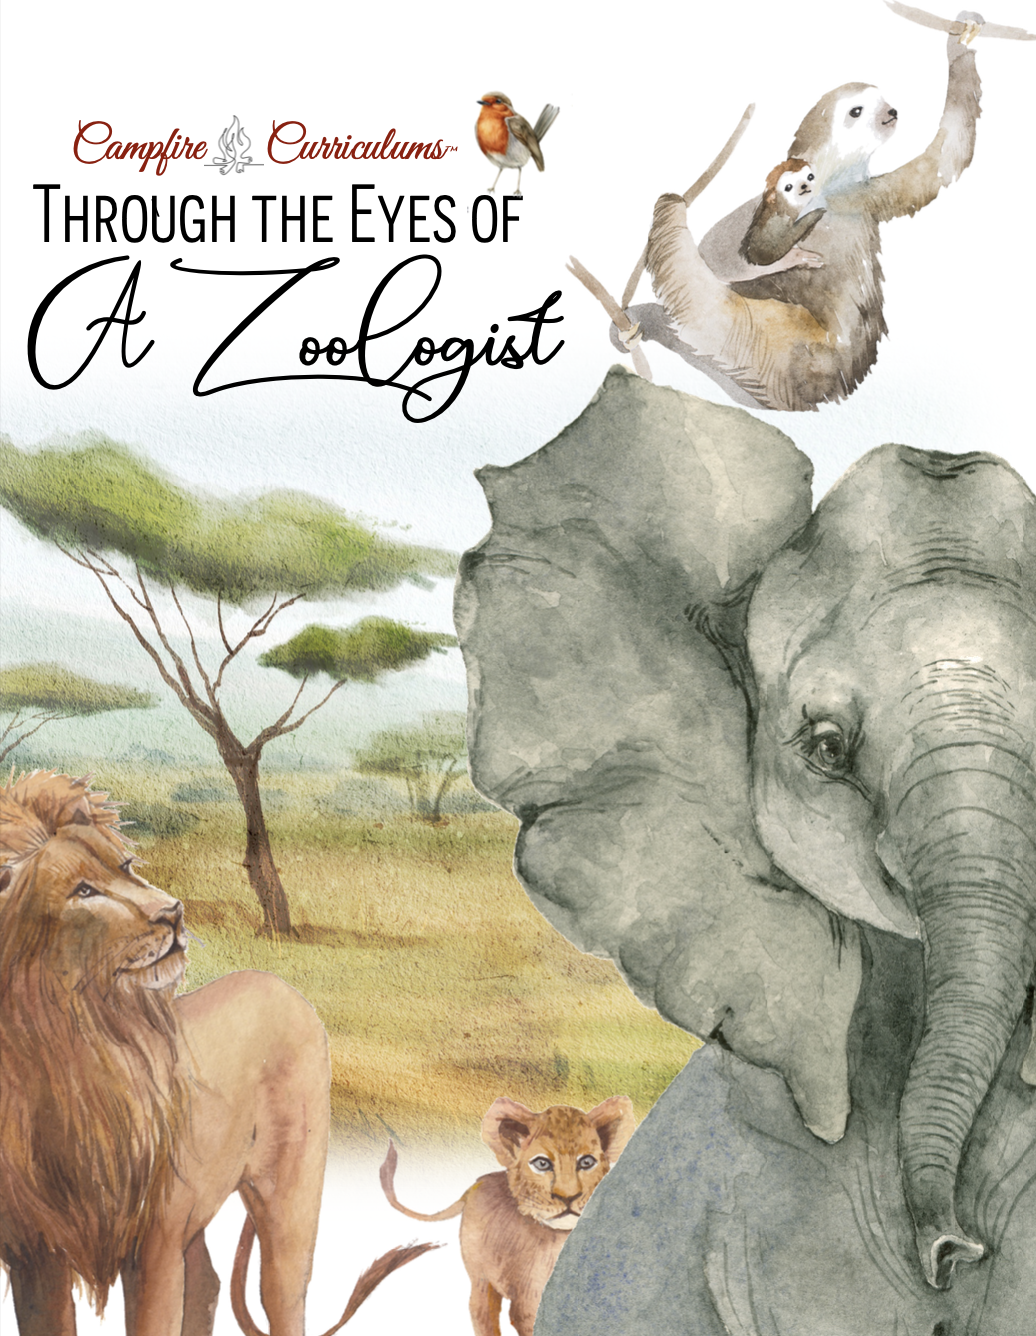 Through the Eyes of | A Zoologist